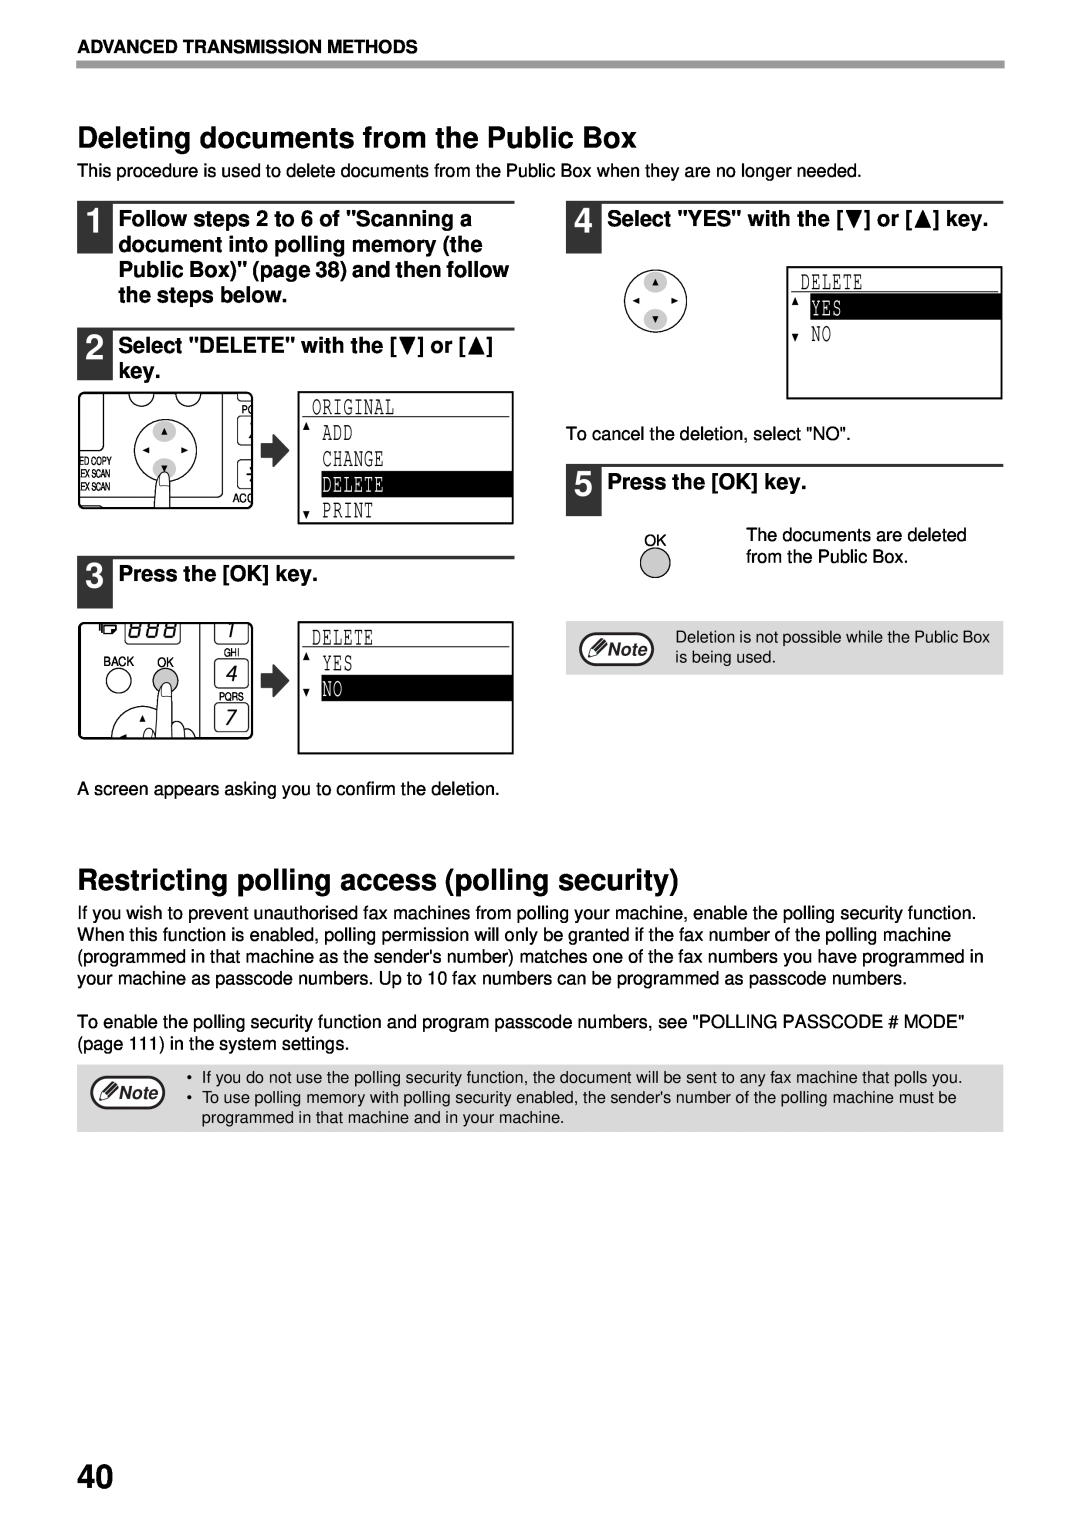 Sharp MX-FX13 Deleting documents from the Public Box, Restricting polling access polling security, Print, Delete, Change 